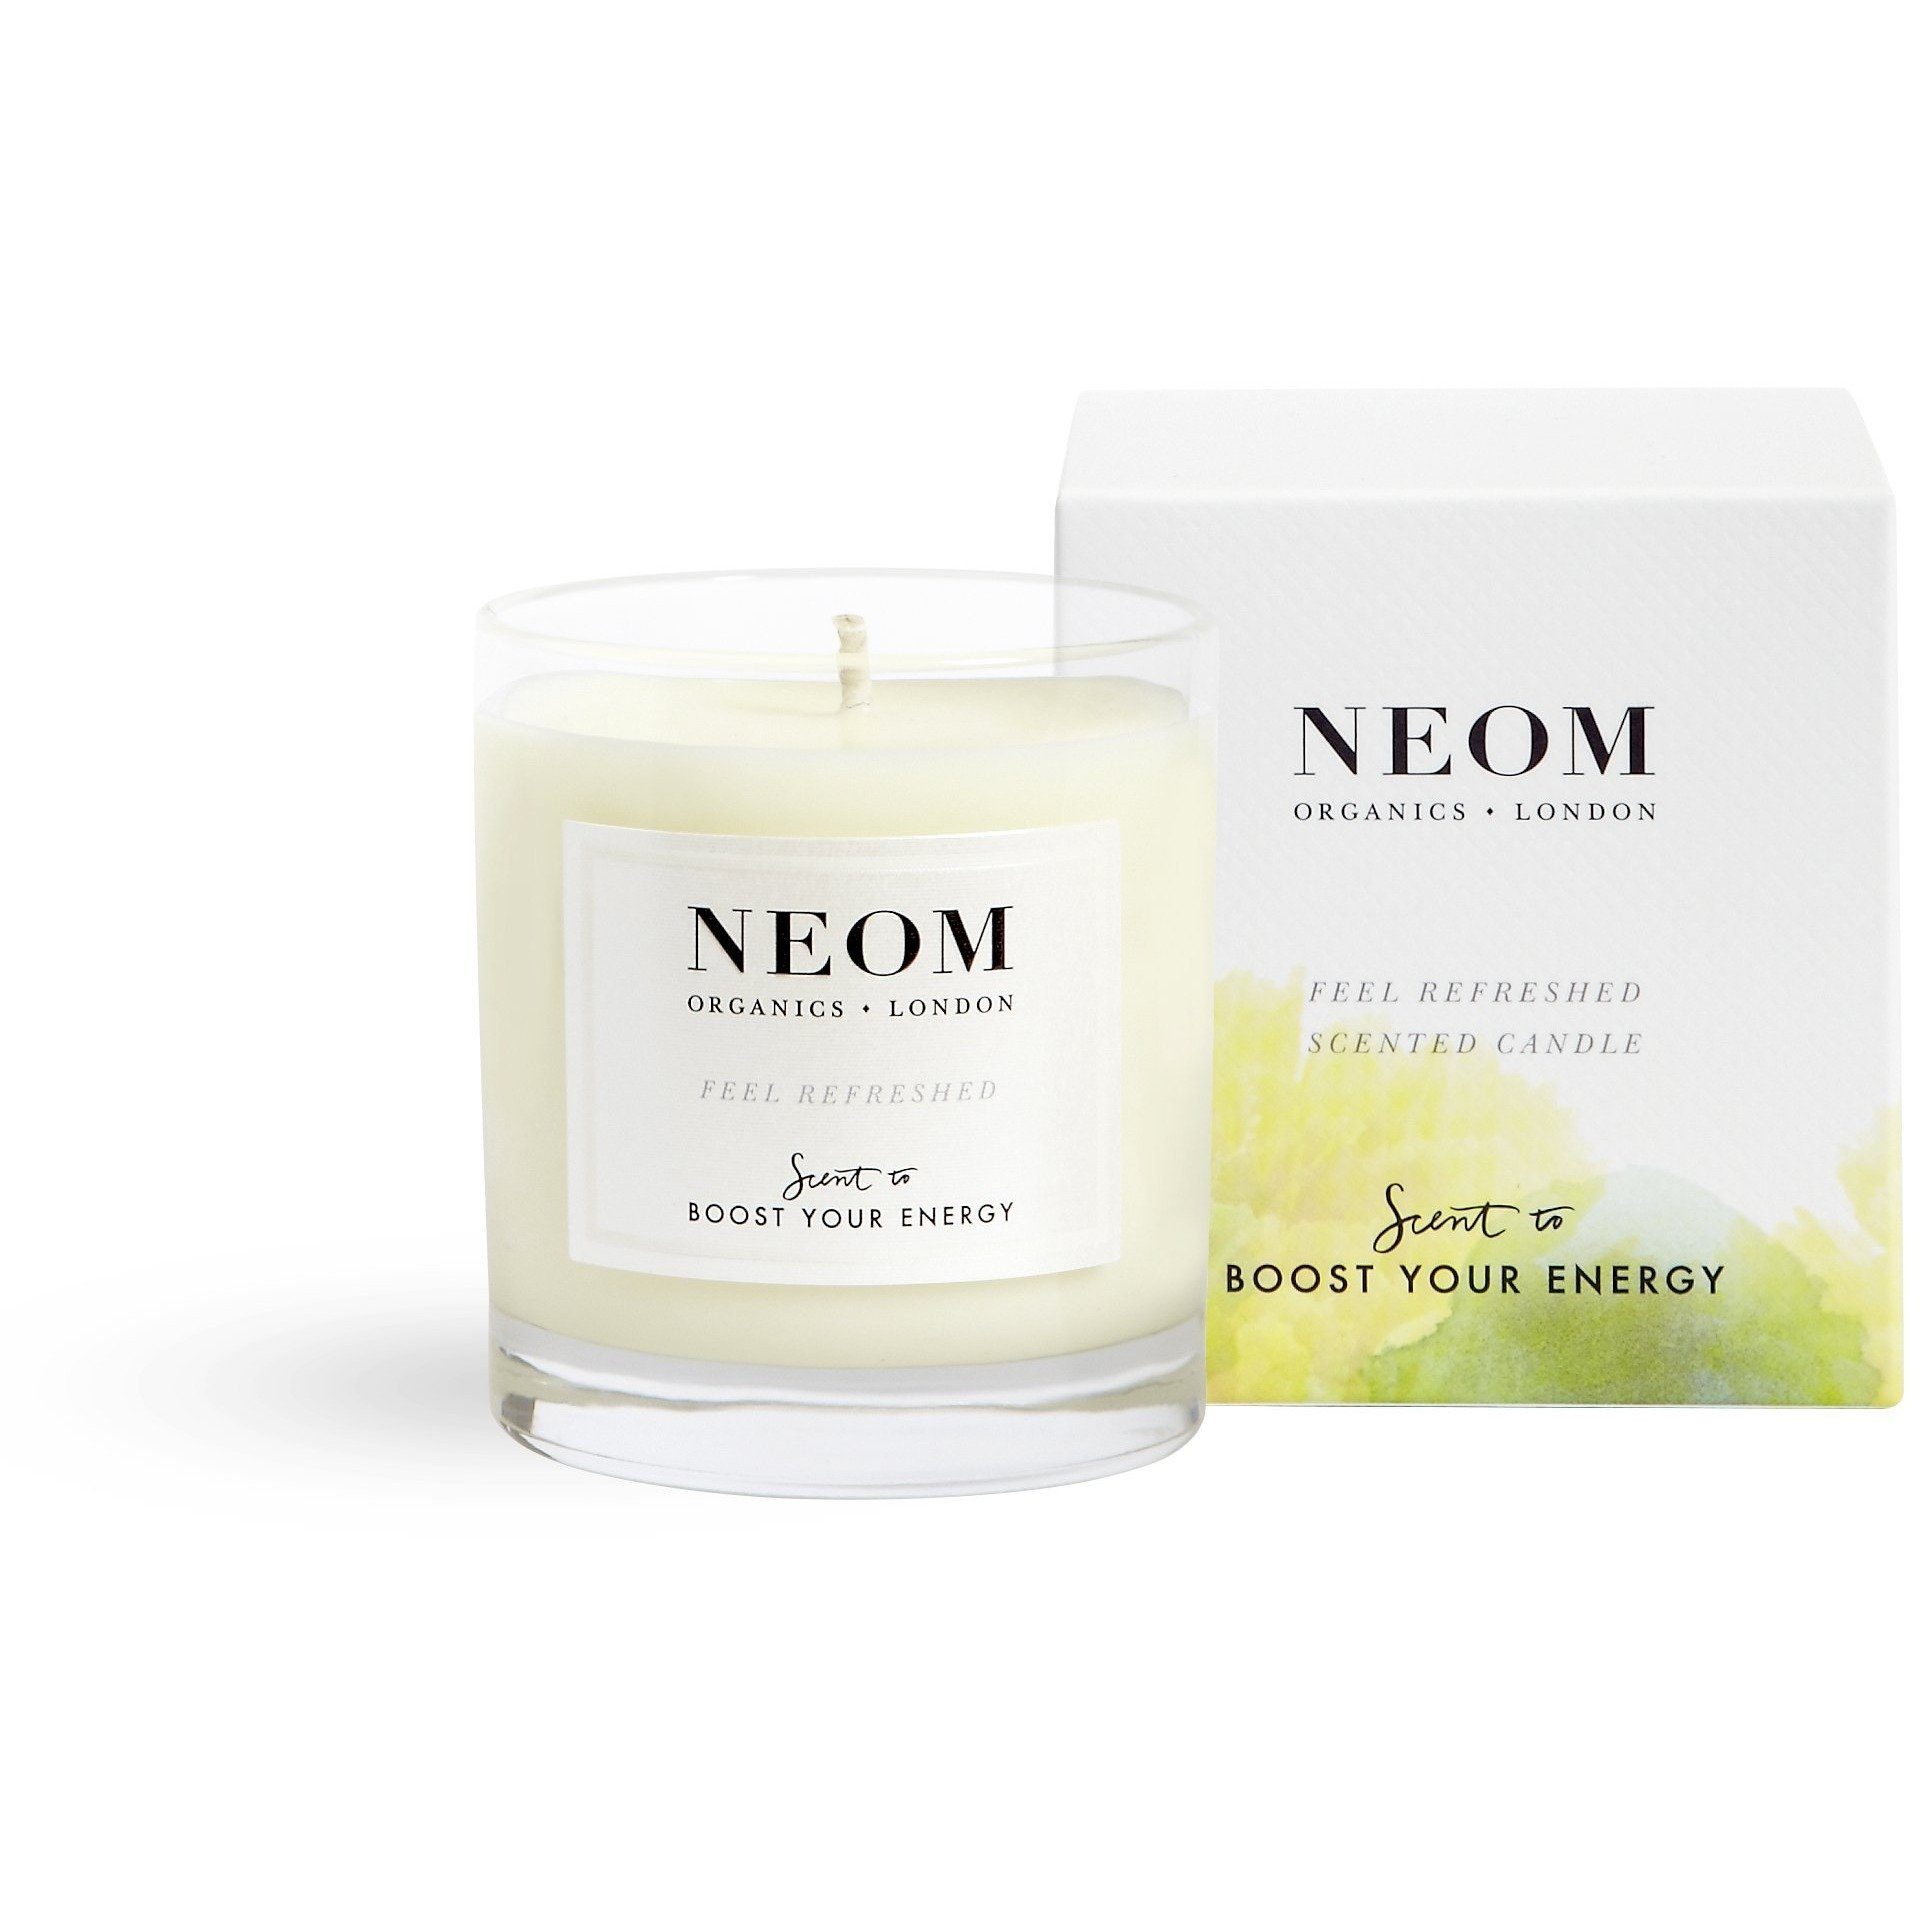 Neom Organics - Feel Refreshed Scented Candle (1 wick) - Kate's Kitchen